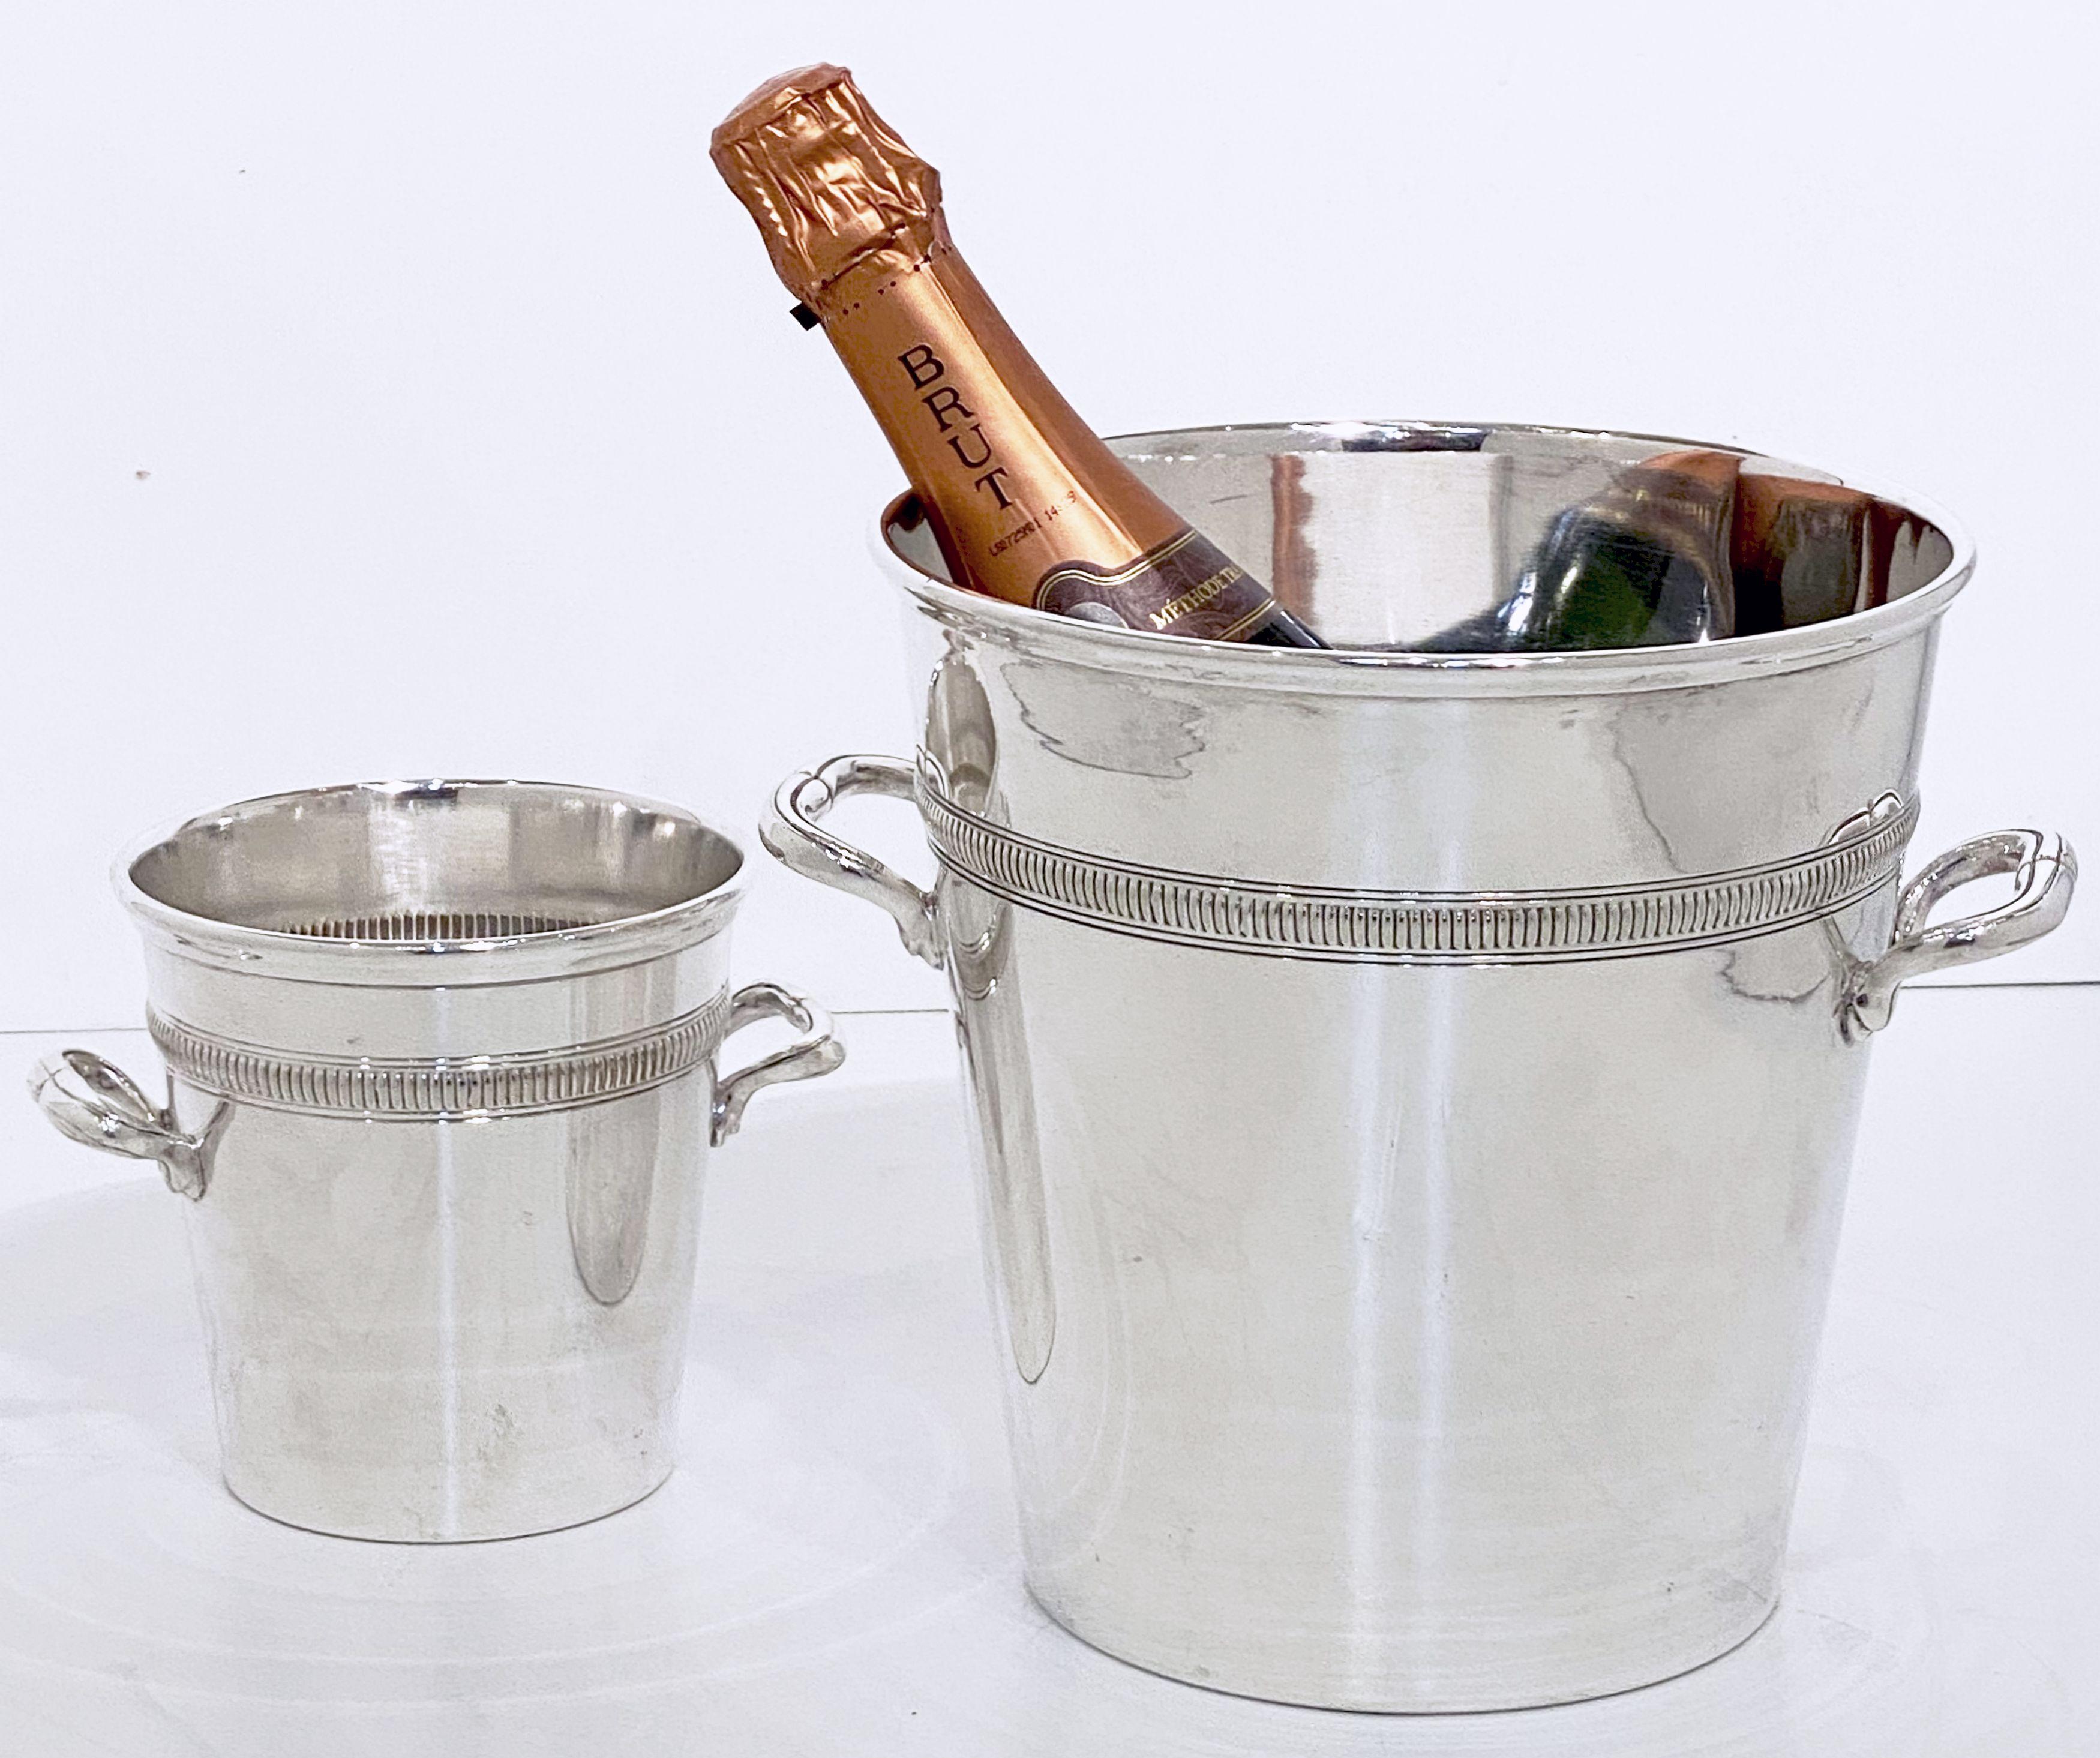 A handsome matching bar set from early 20th century France, featuring a large champagne bucket and a small ice bucket of fine plate silver - each with rolled top edge, two opposing handles, and tapering body with an elegant Edwardian style